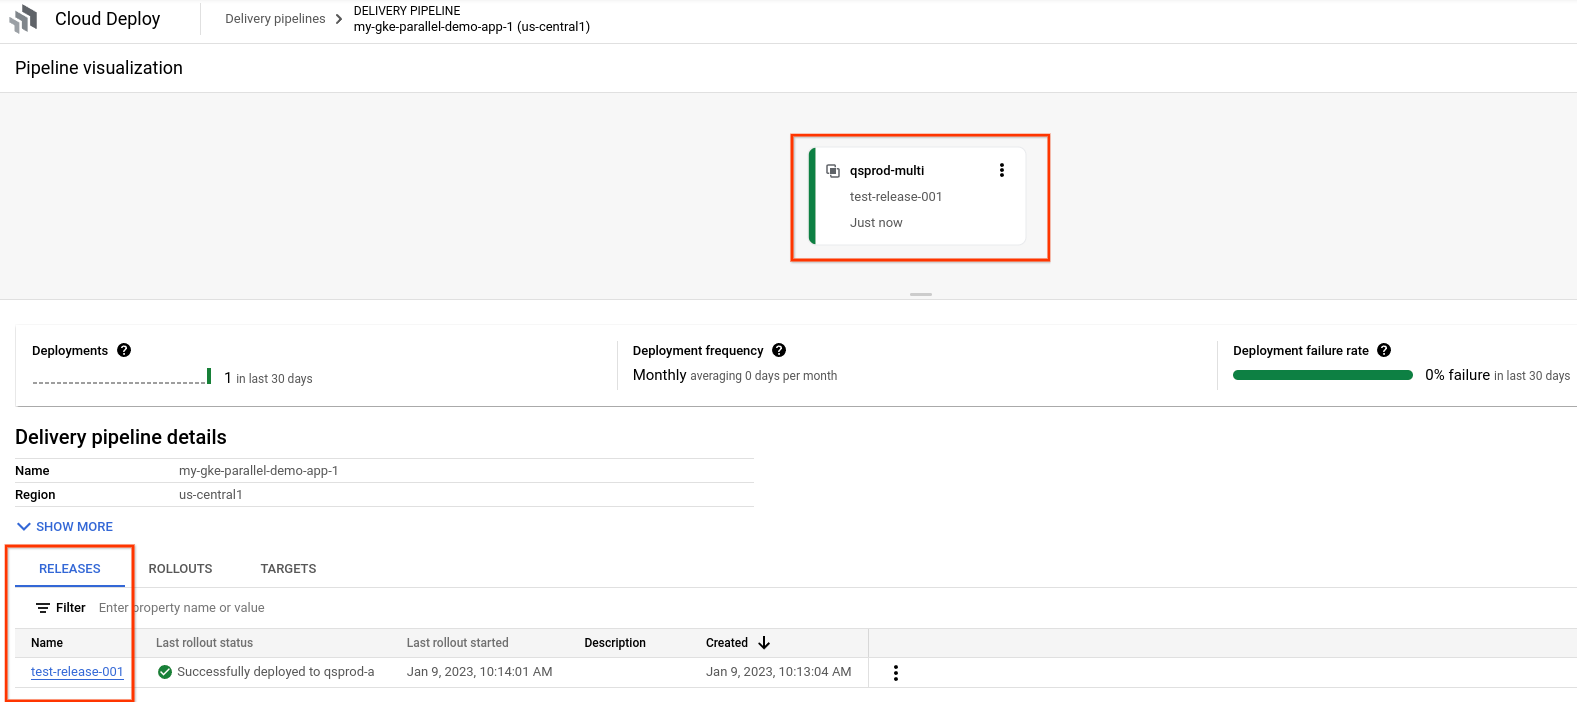 delivery pipeline visualization in Google Cloud console